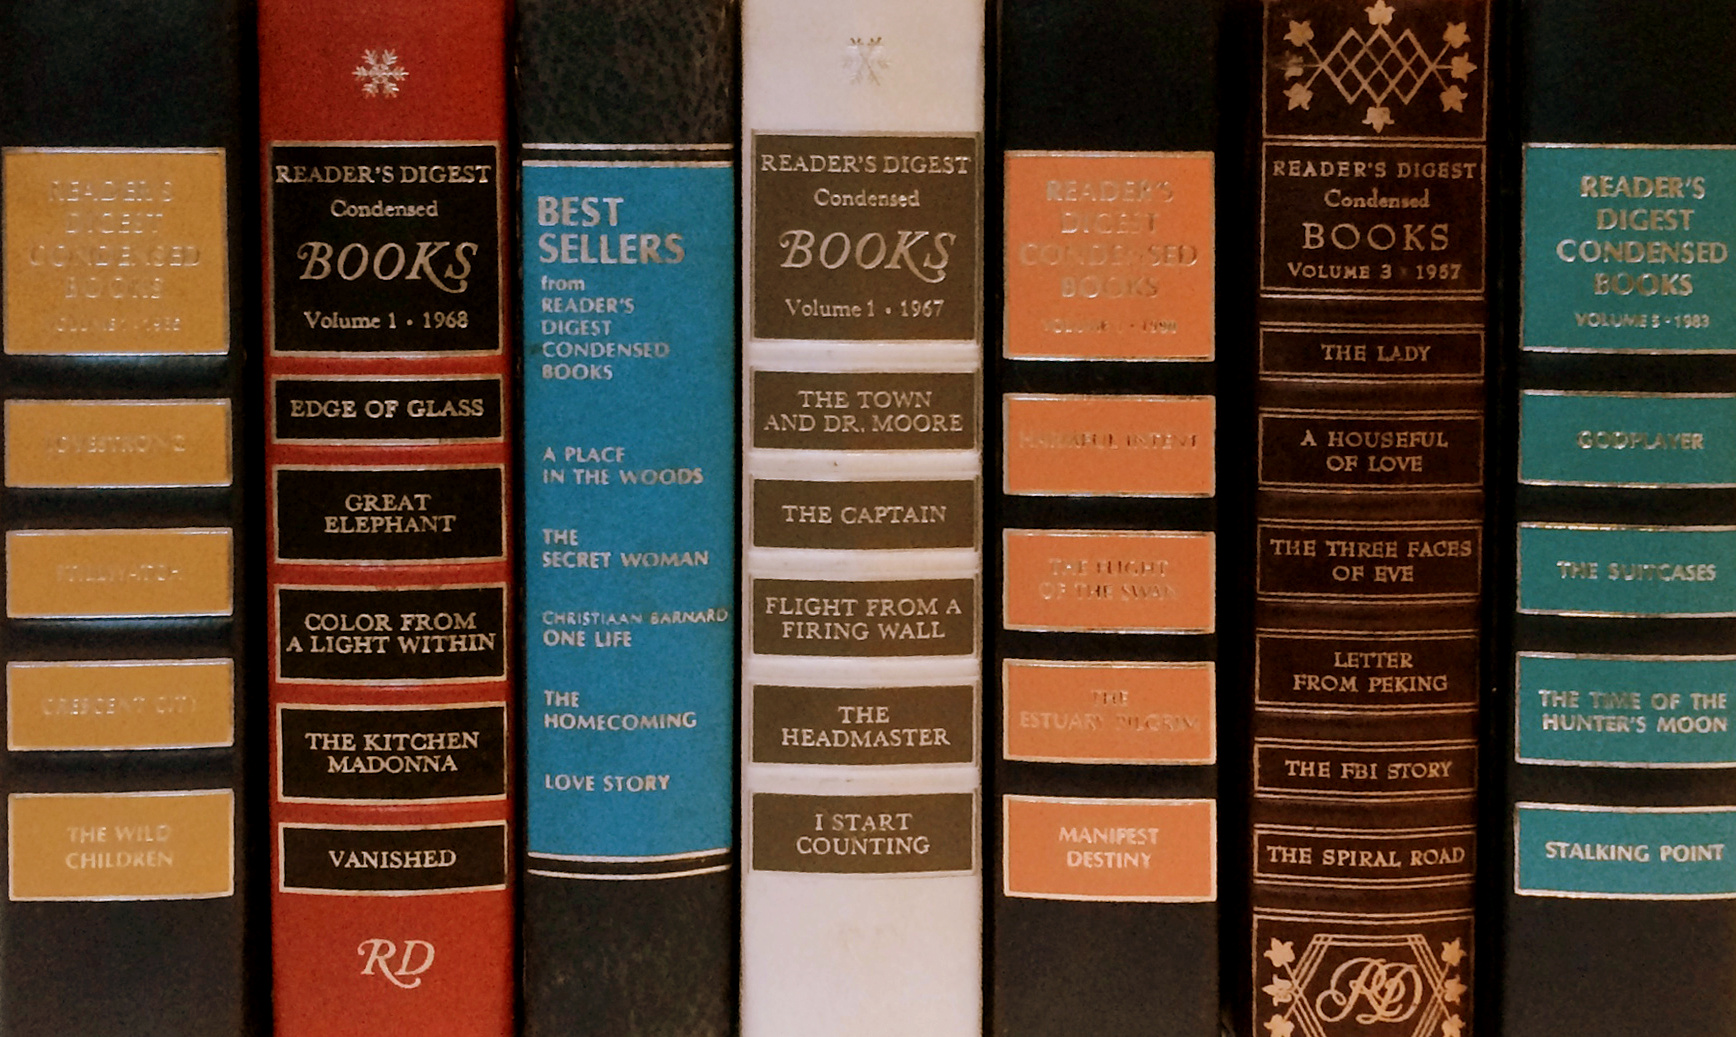 Best Sellers from Reader's Digest Condensed Books: Books